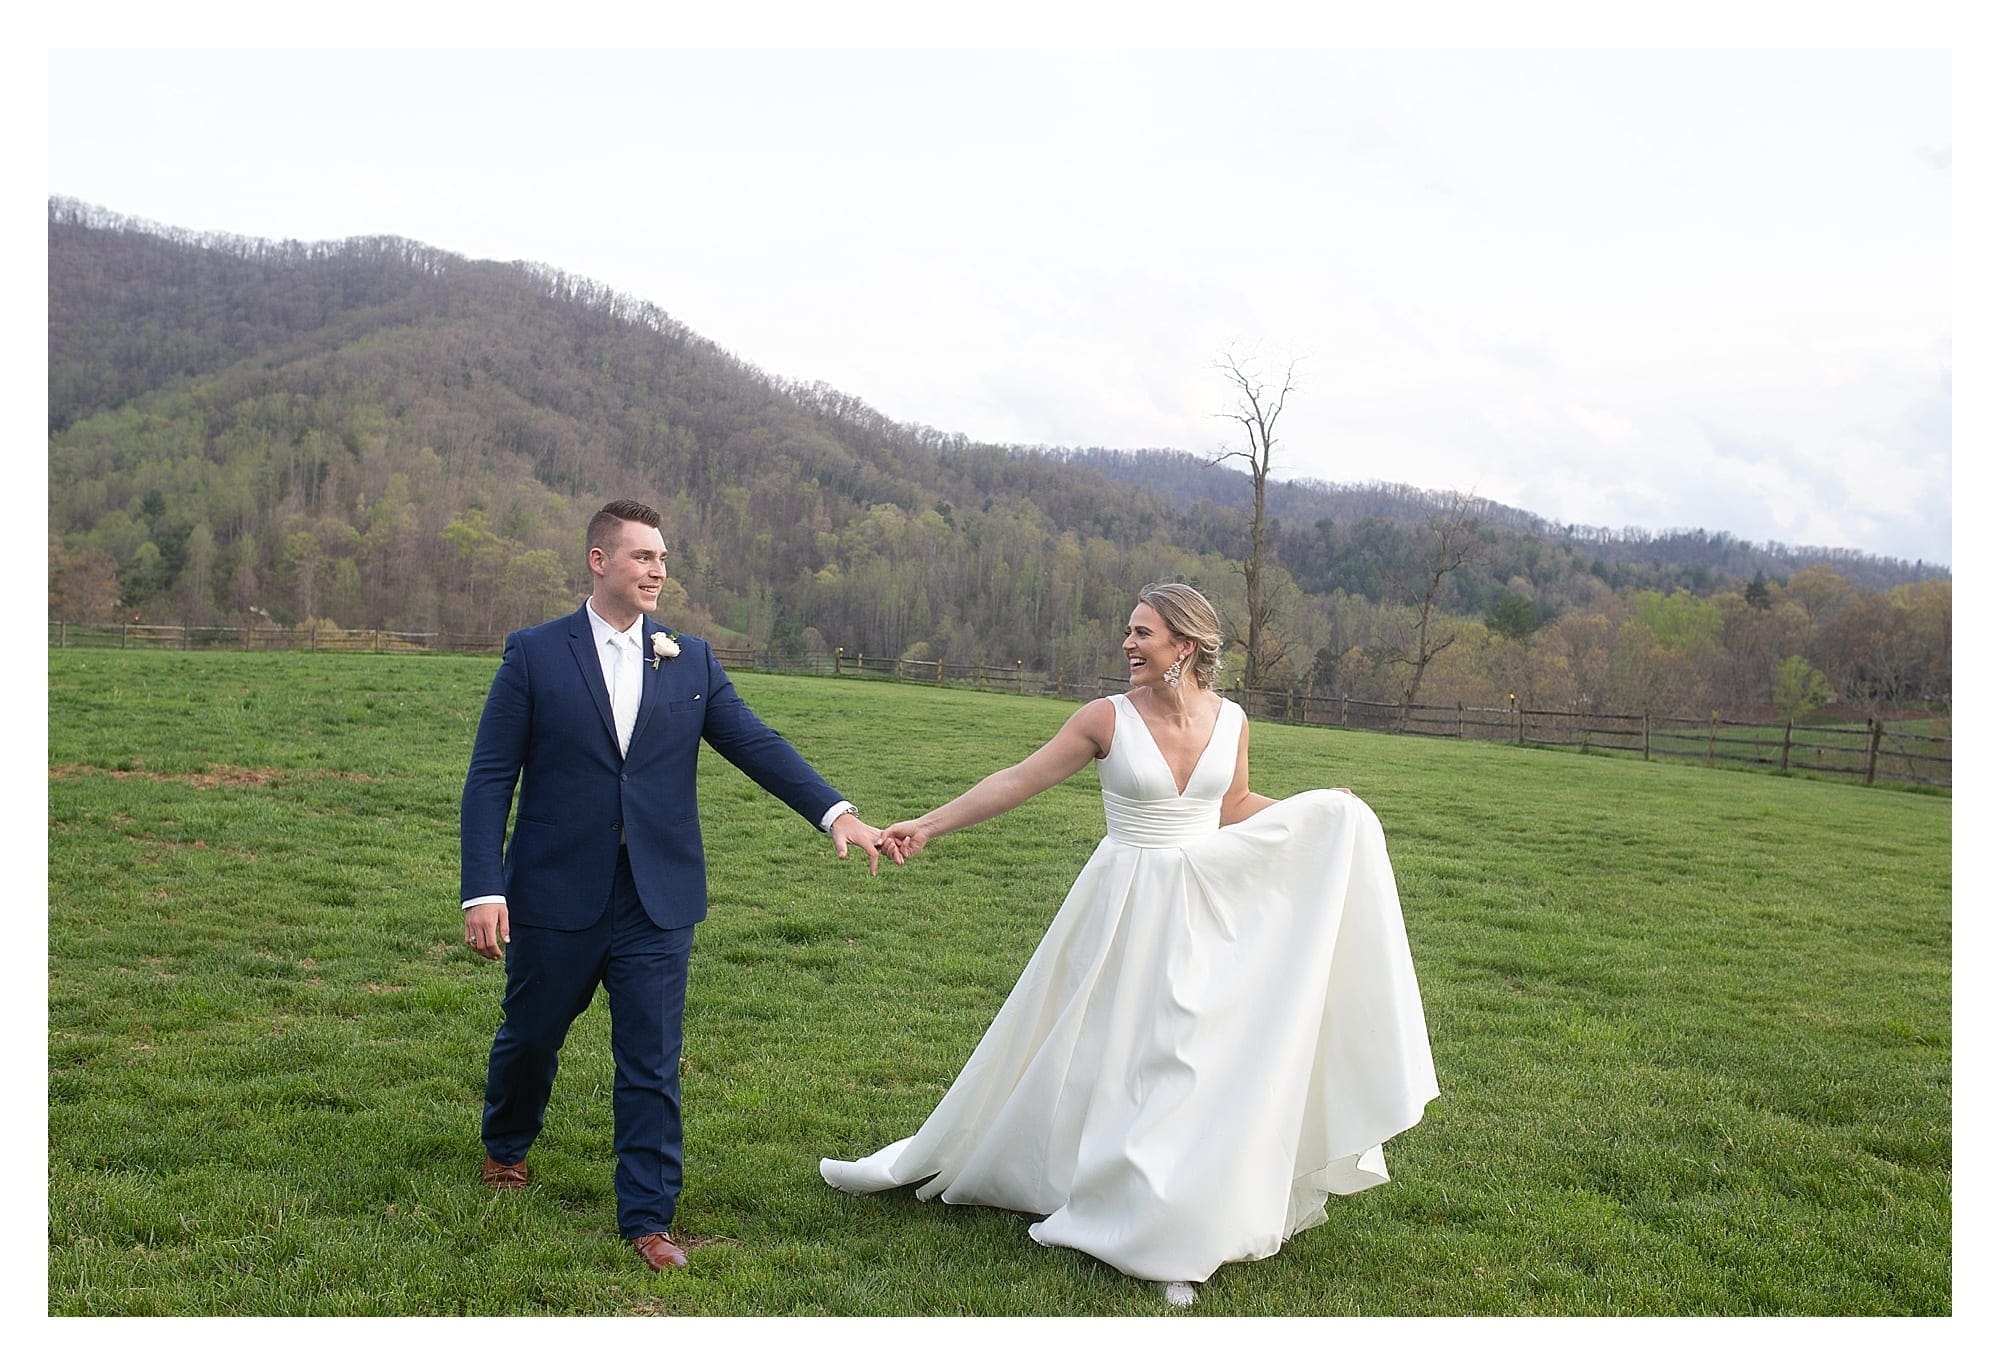 Bride and groom holding hands in grassy field